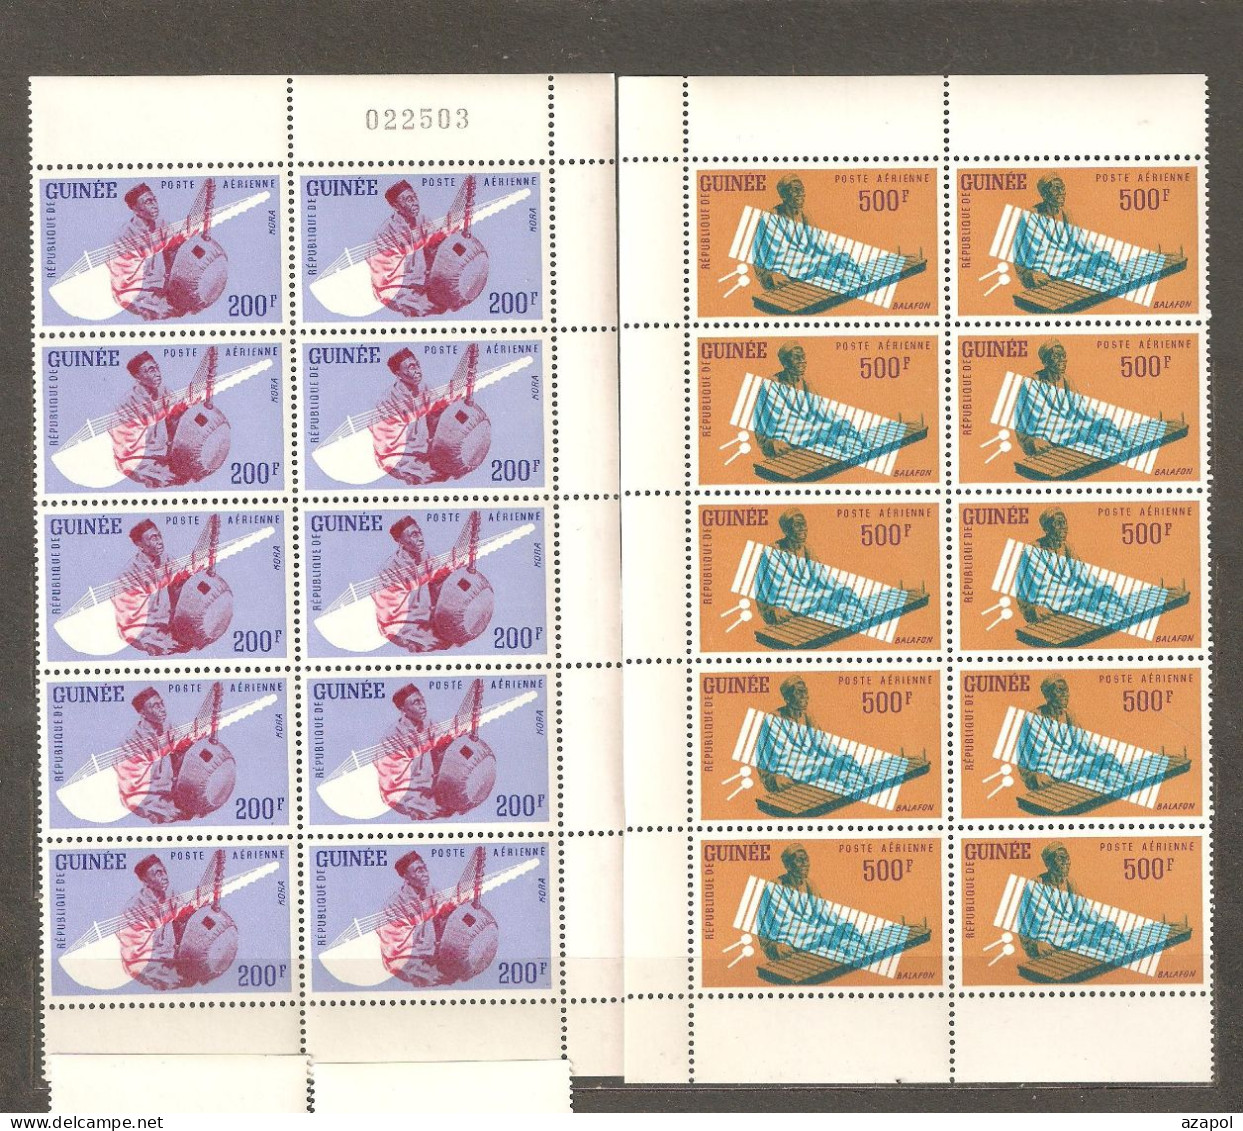 Guinee: 2 Mint Stamps Of Set In Block Of 10 - Airmail, Musical Instruments, 1962, Mi#126-7, MNH - Guinea (1958-...)